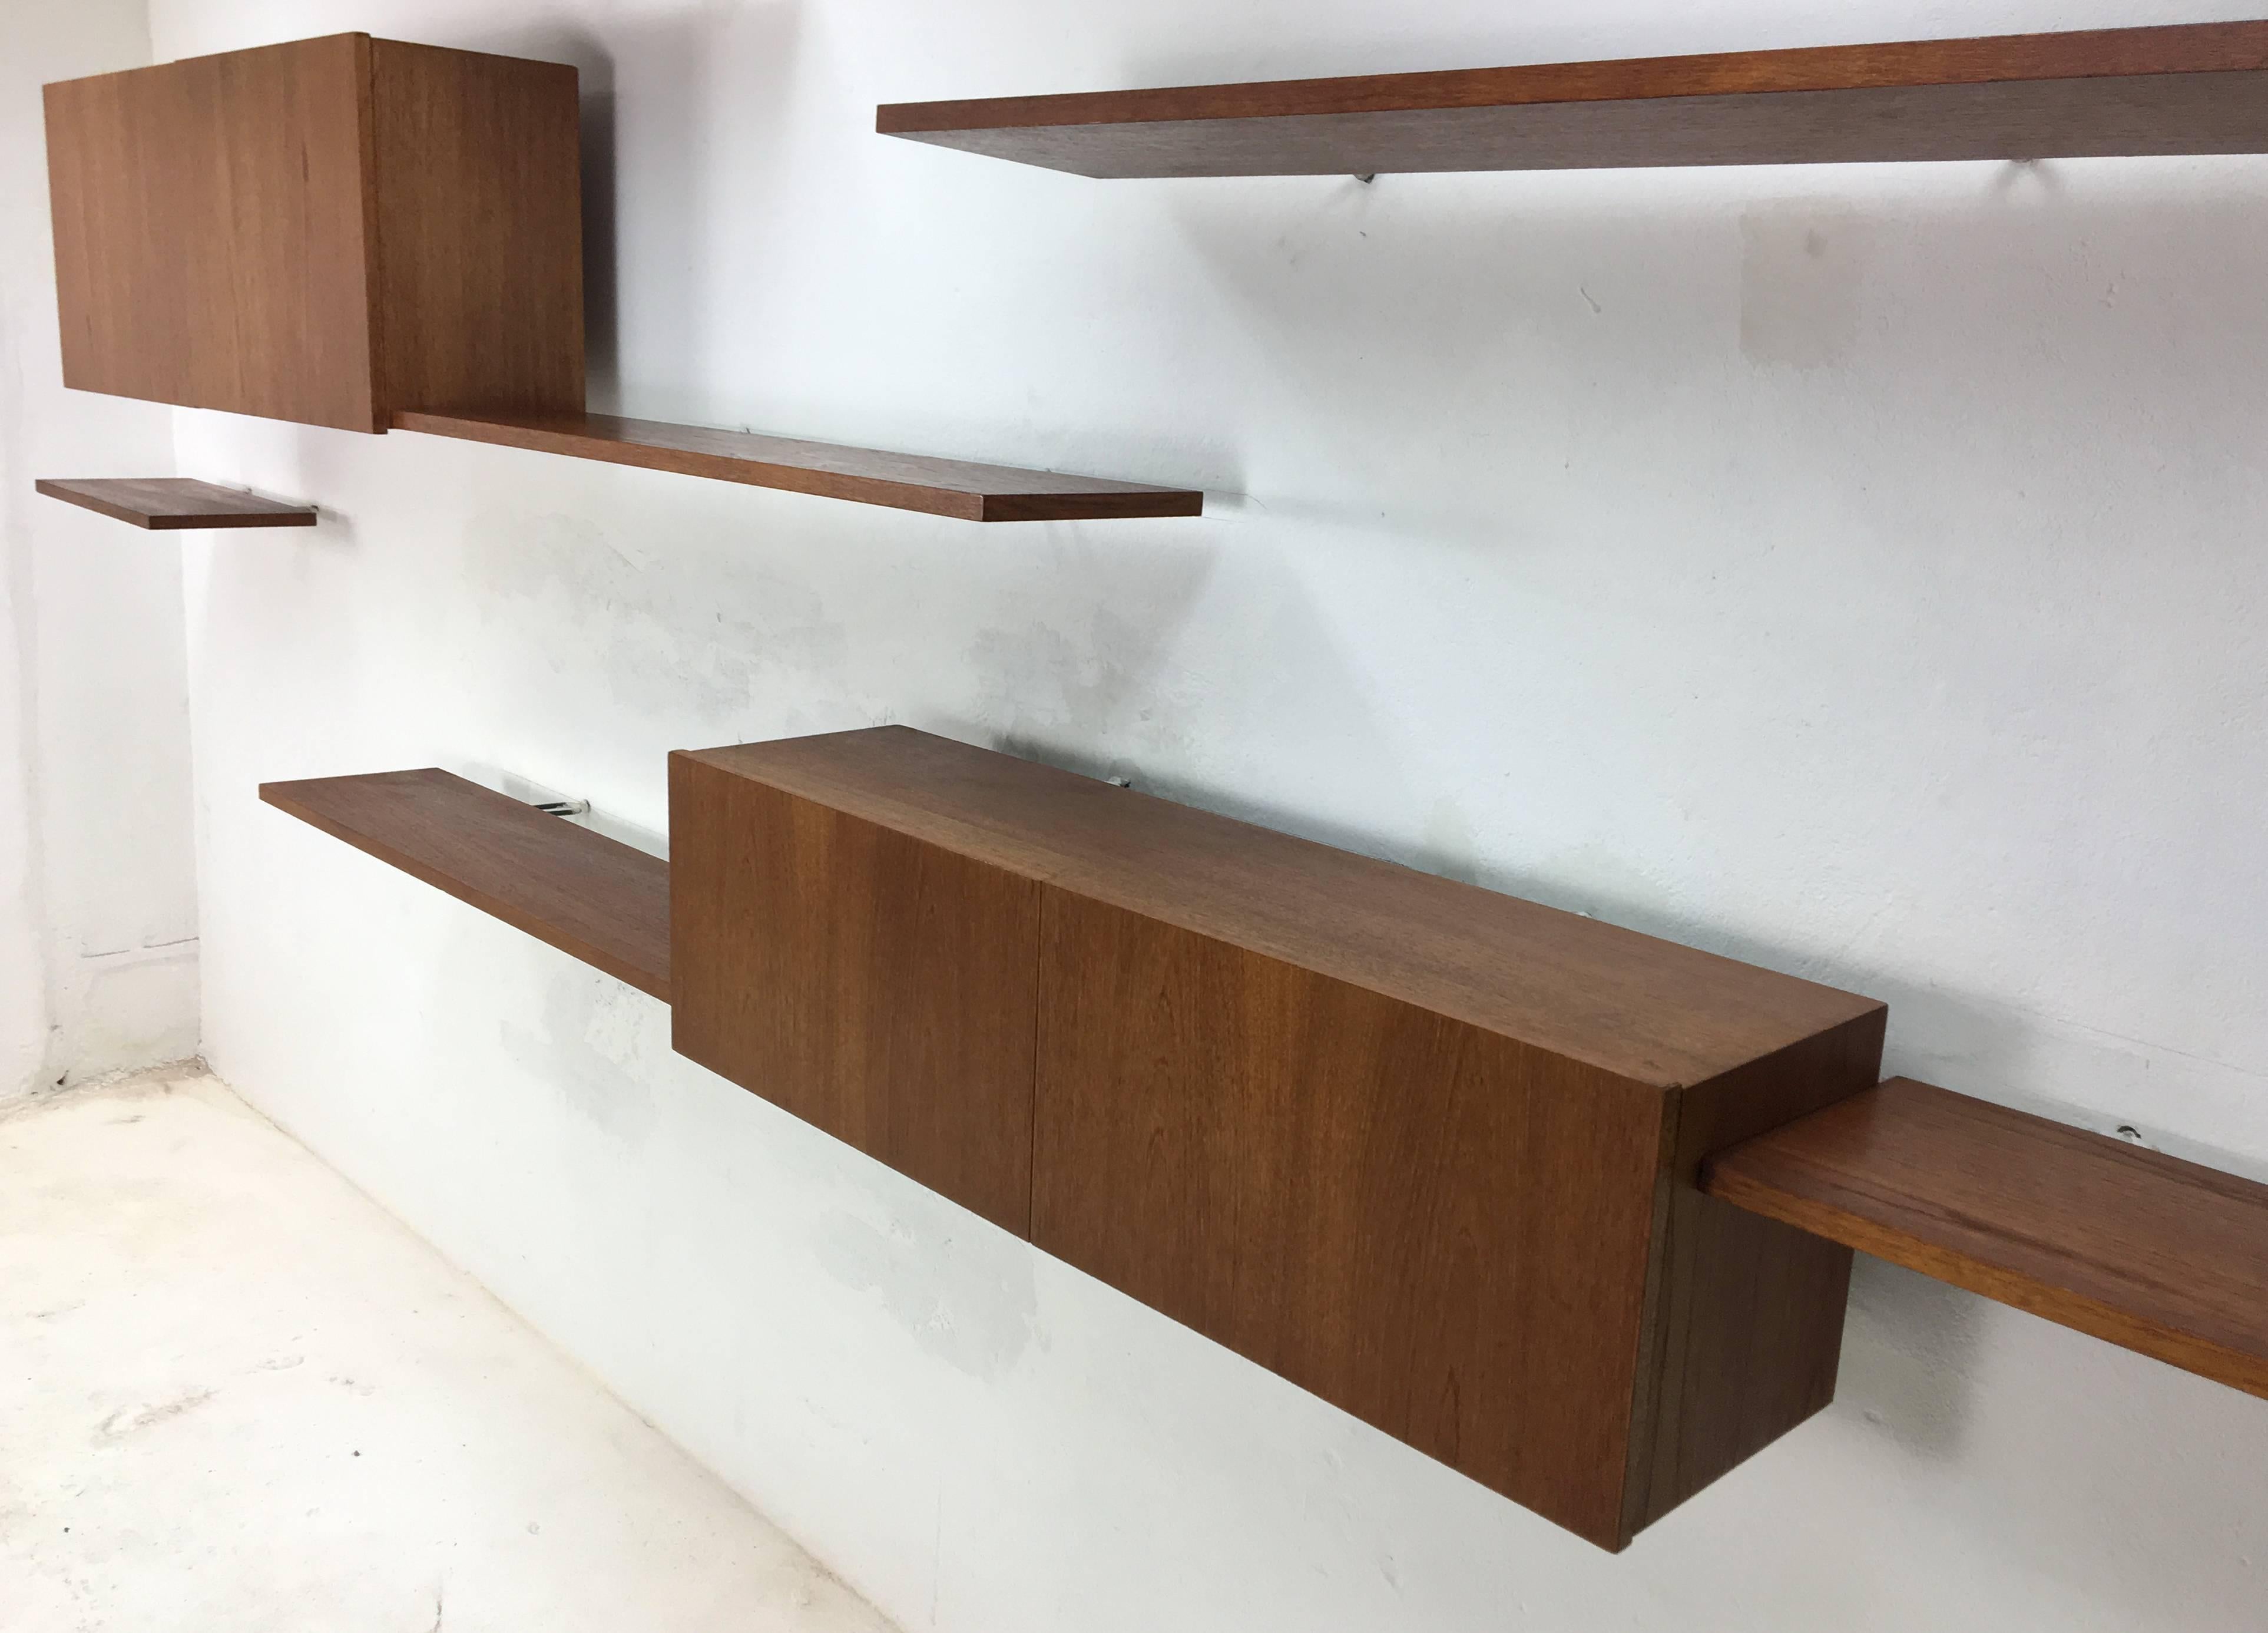 Eight piece floating wall system from German floating furniture specialists Banz Bord. Rosewood on Banz Bord's trademark invisible steel wall mounts.

This system consists of the following parts:

Three x large shelf, 100 x 23cm
Threex small